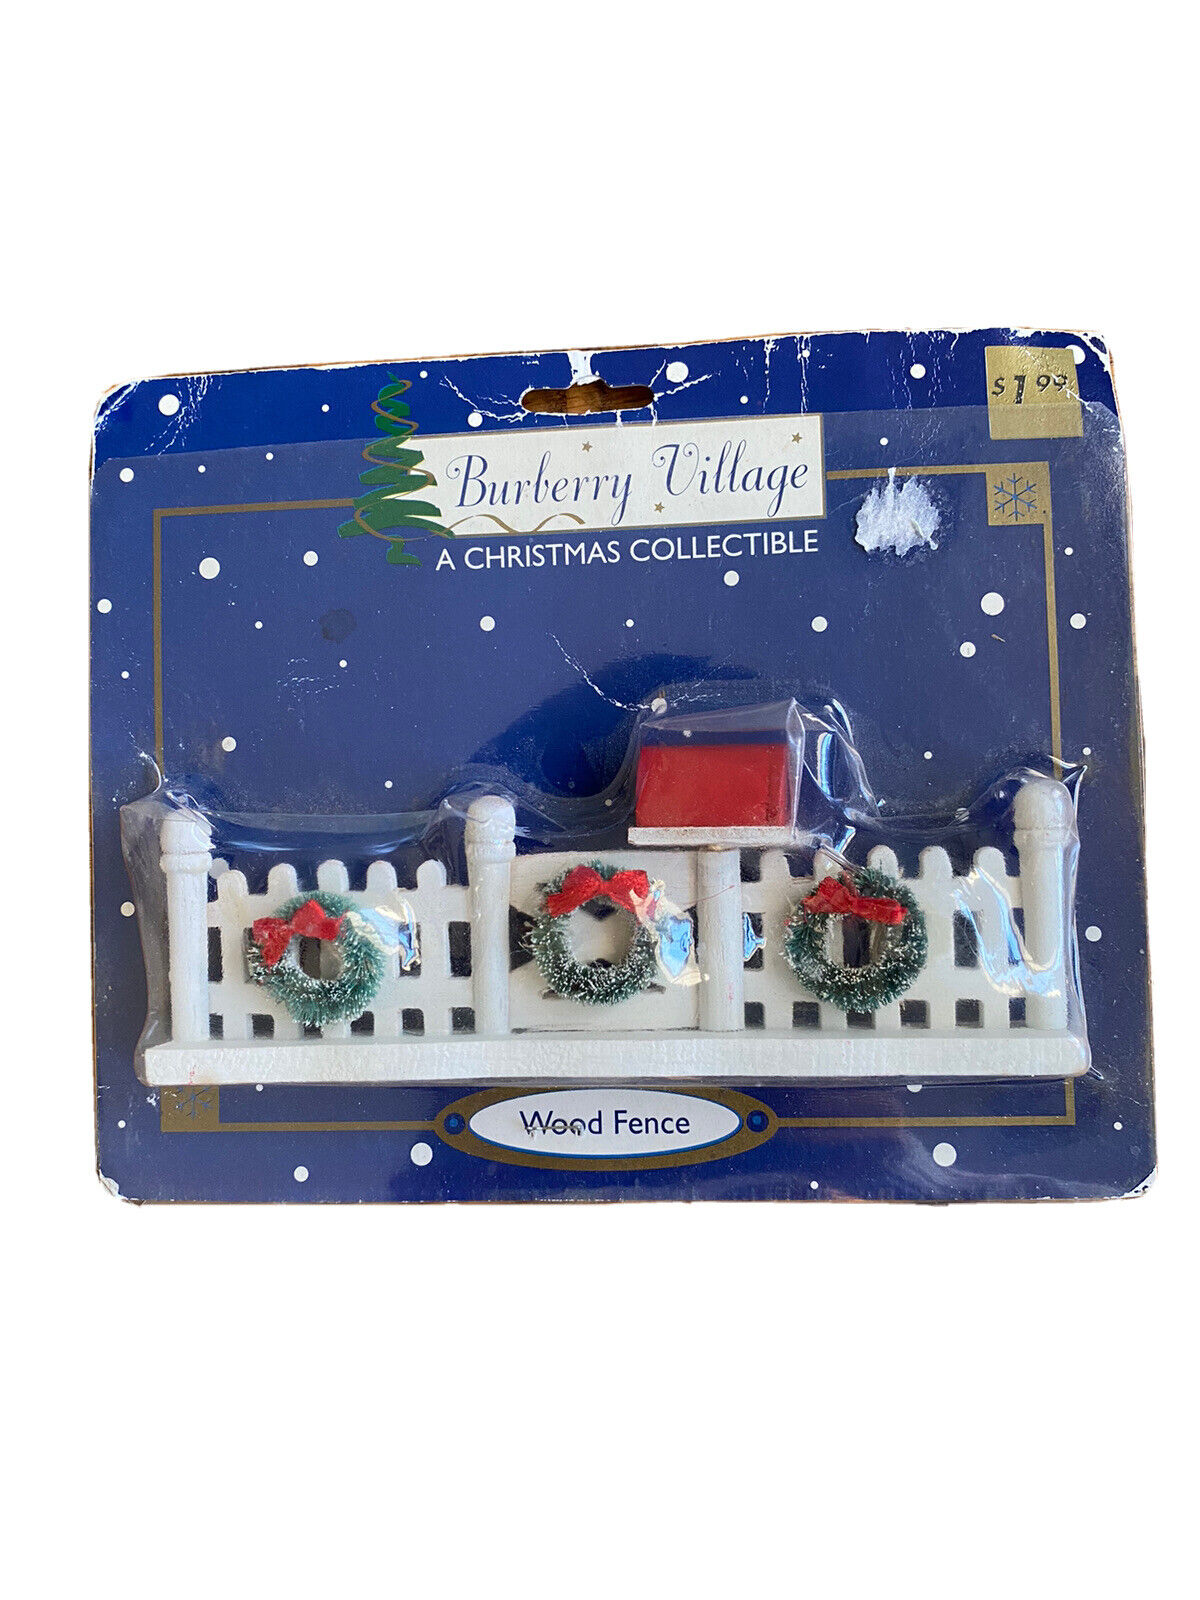 Burberry Village Christmas Collection Wood Fence with mailbox and wreath